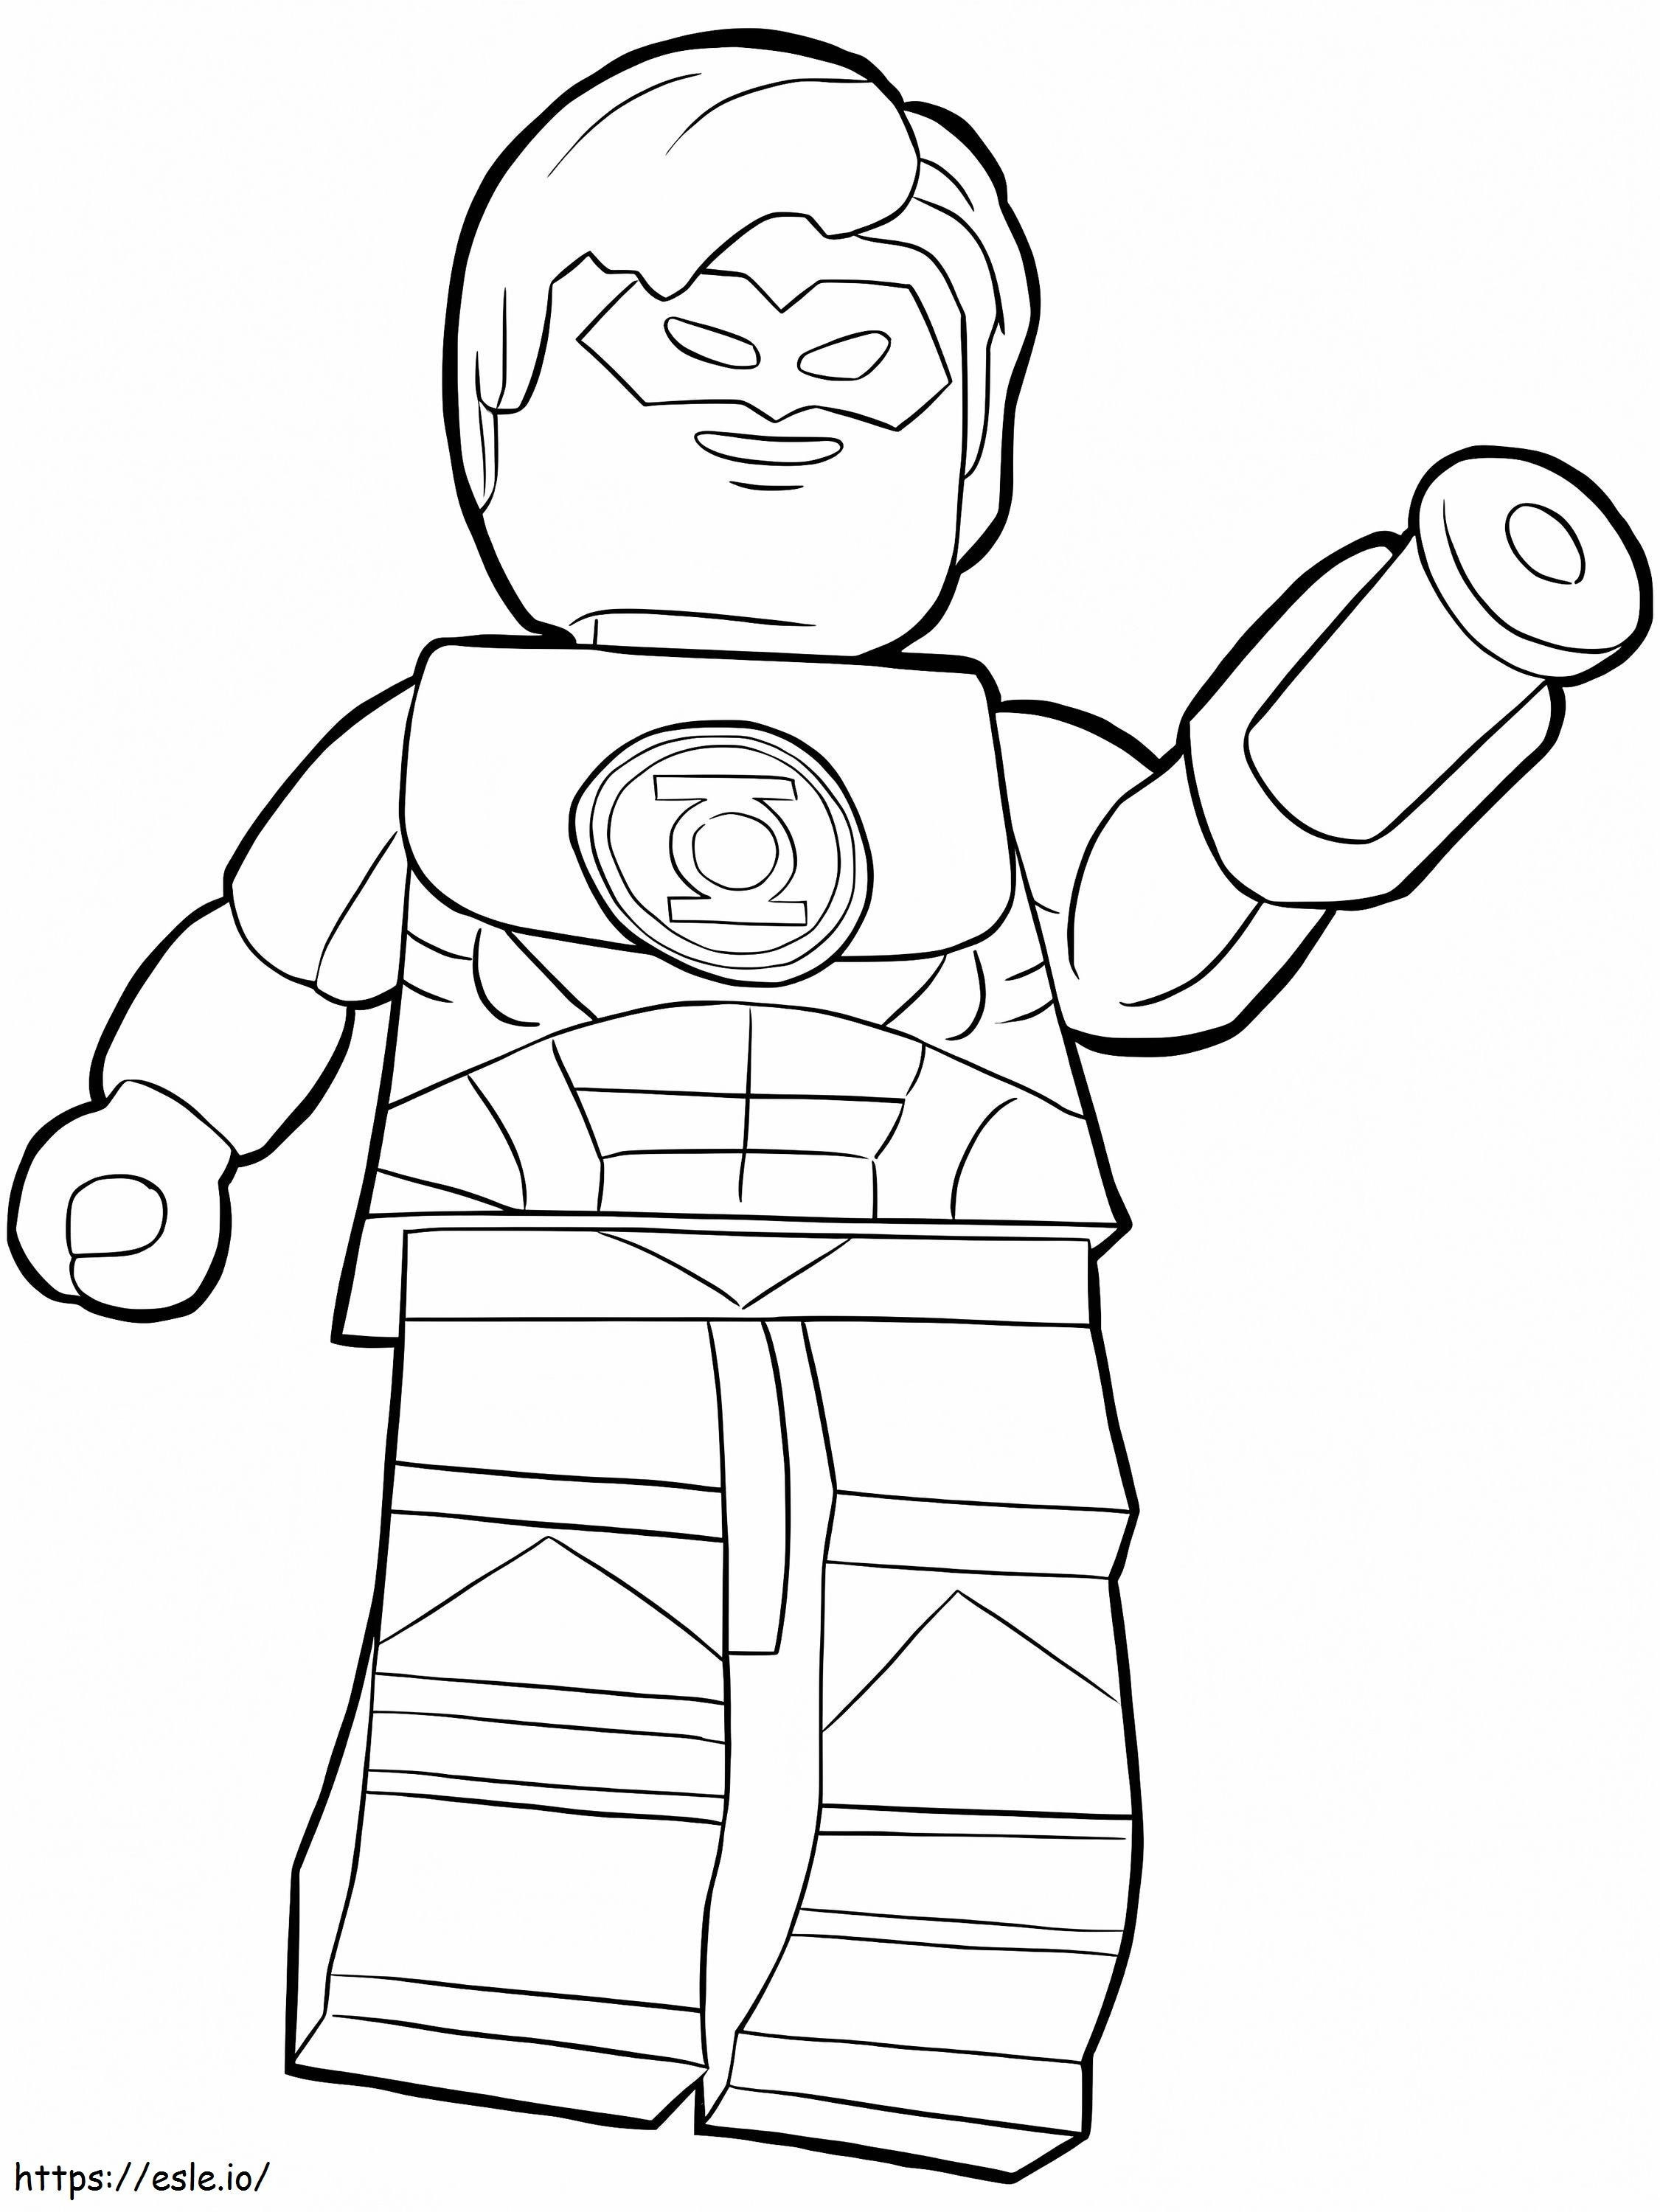 Green Lantern Lego coloring page